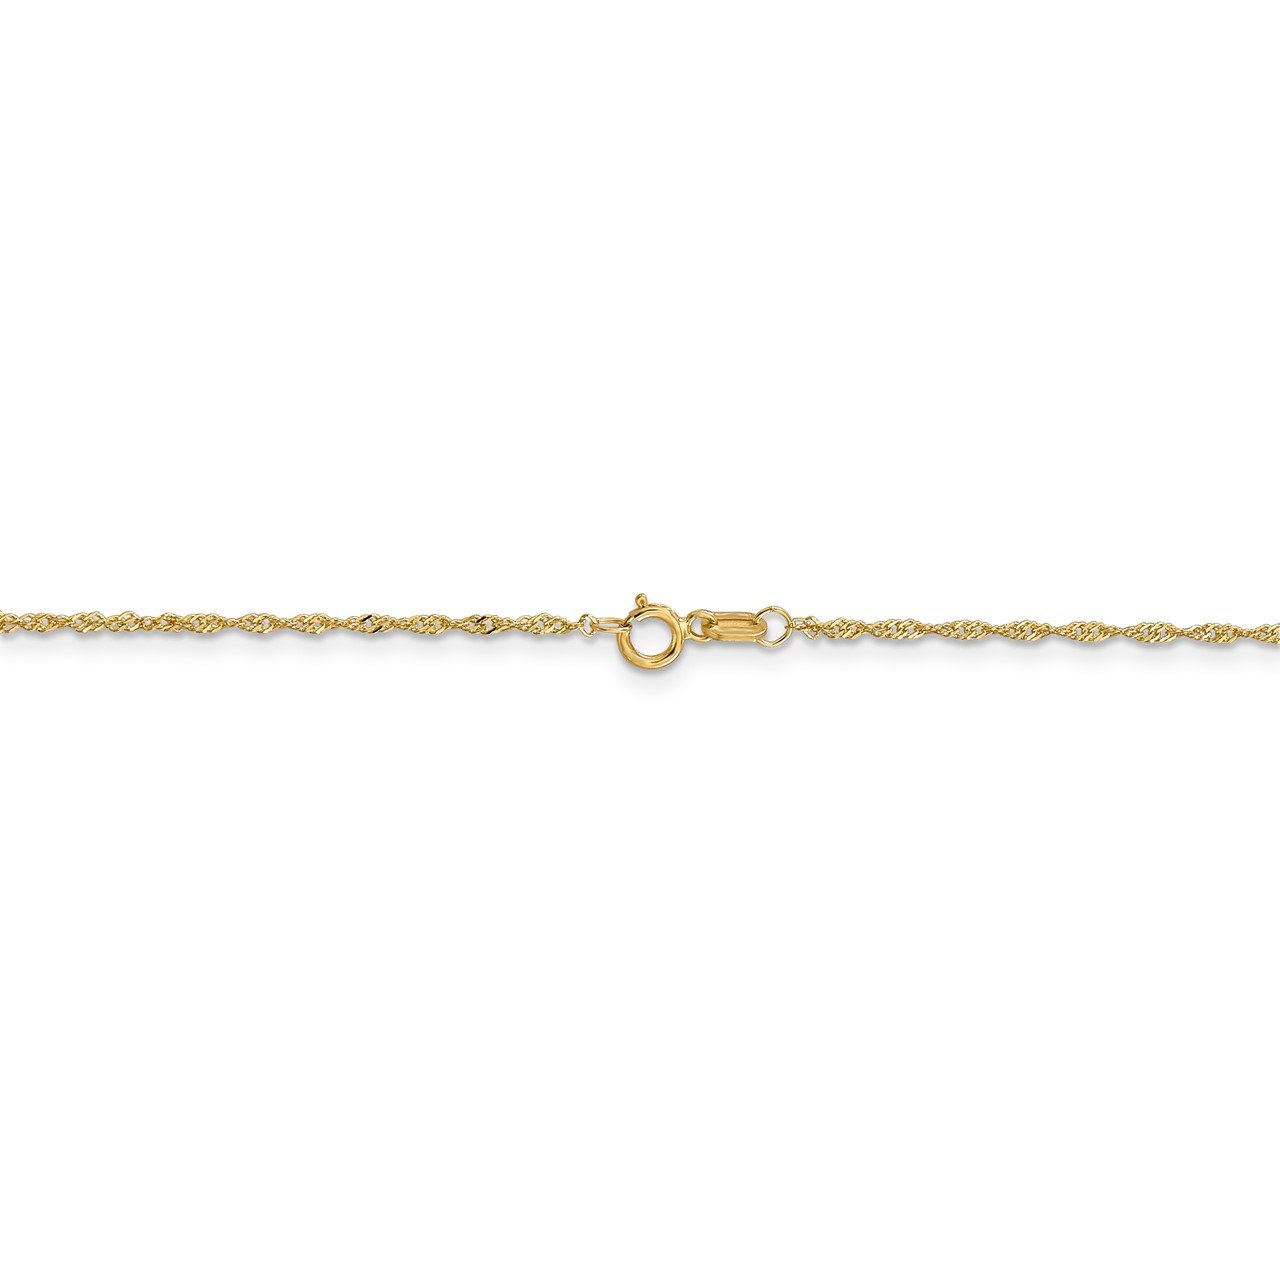 Leslie's 14K 1mm Singapore with Spring Ring Clasp Chain-3